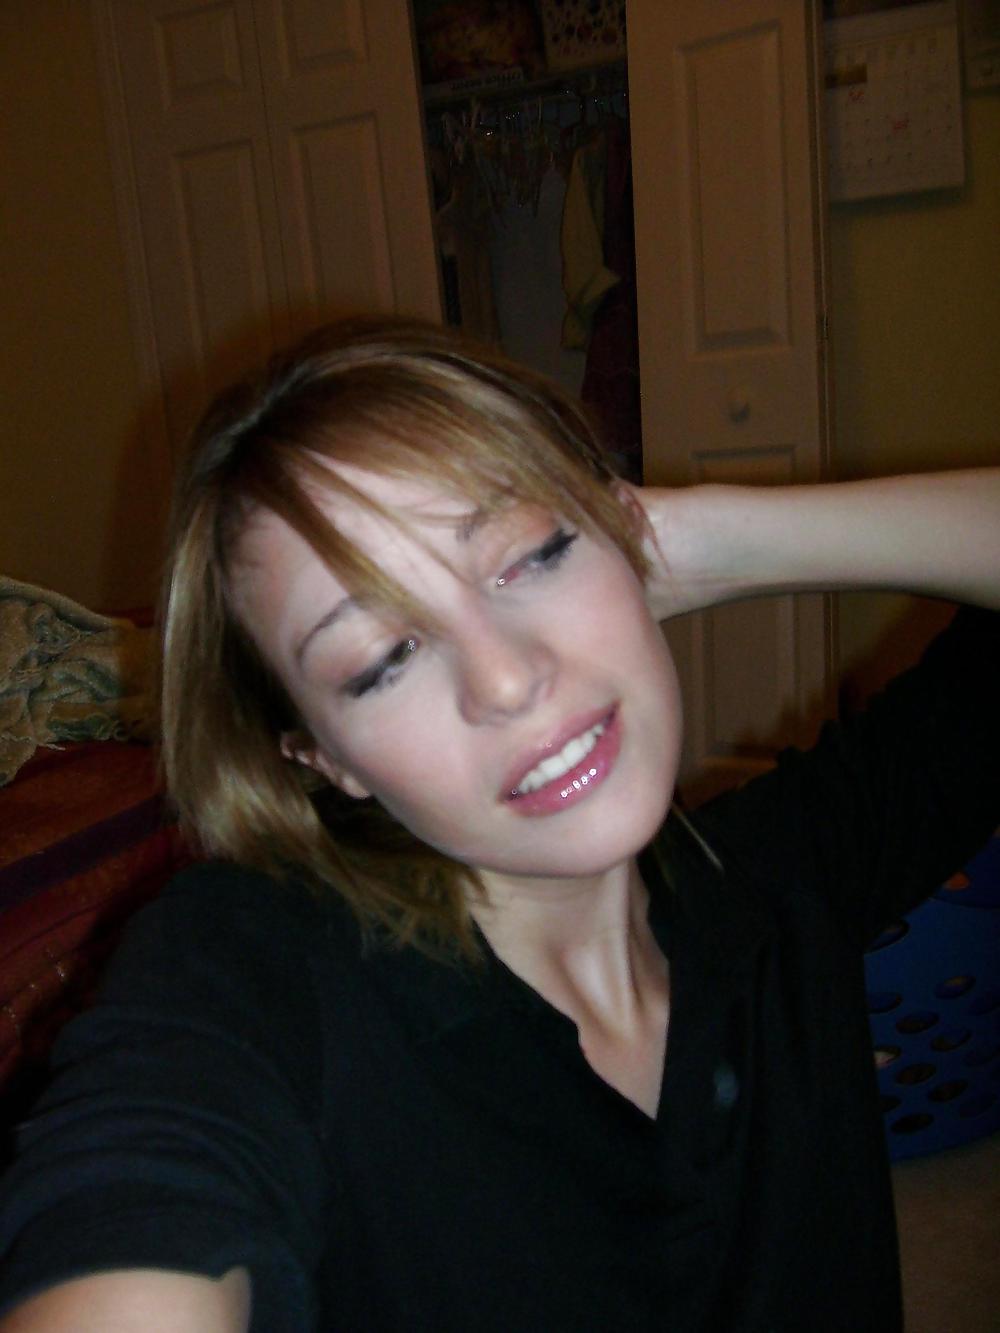 Flawless blonde spreading for the camera adult photos